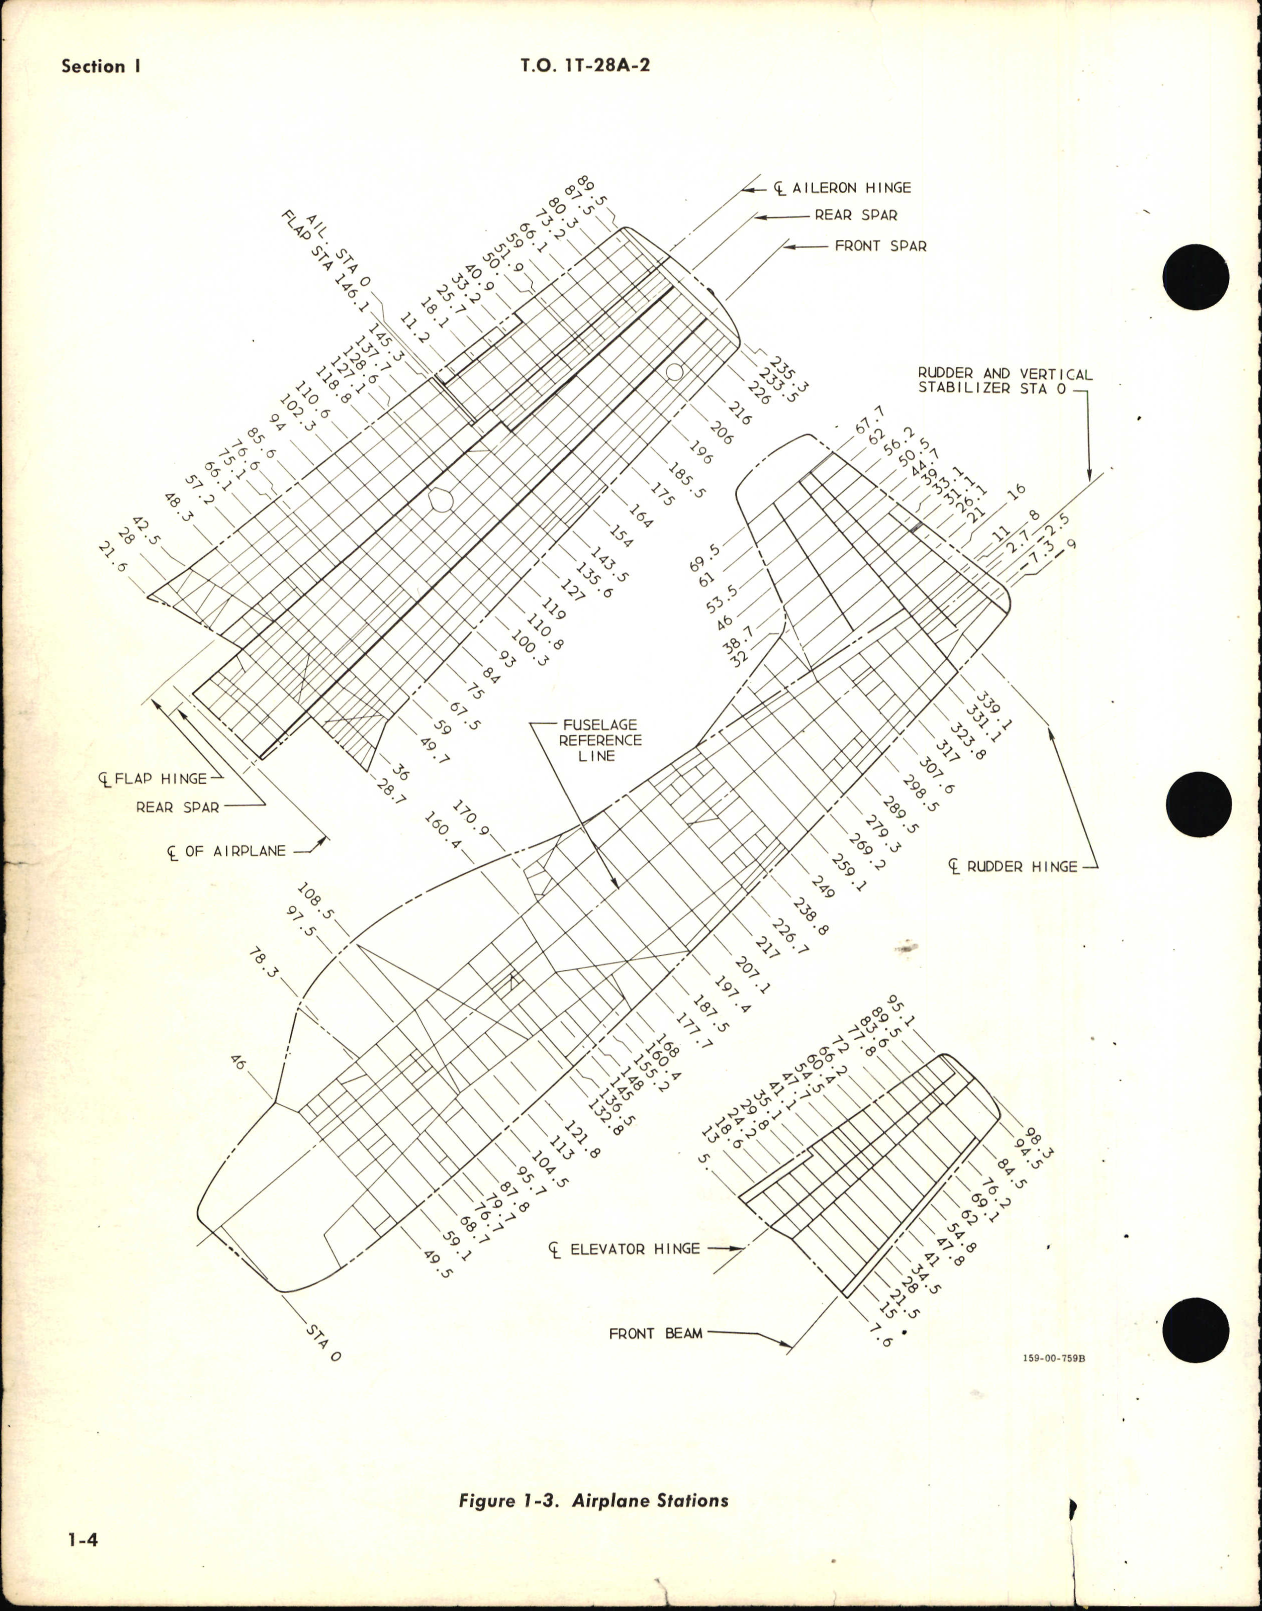 Sample page 6 from AirCorps Library document: Maintenance Manual for T-28A